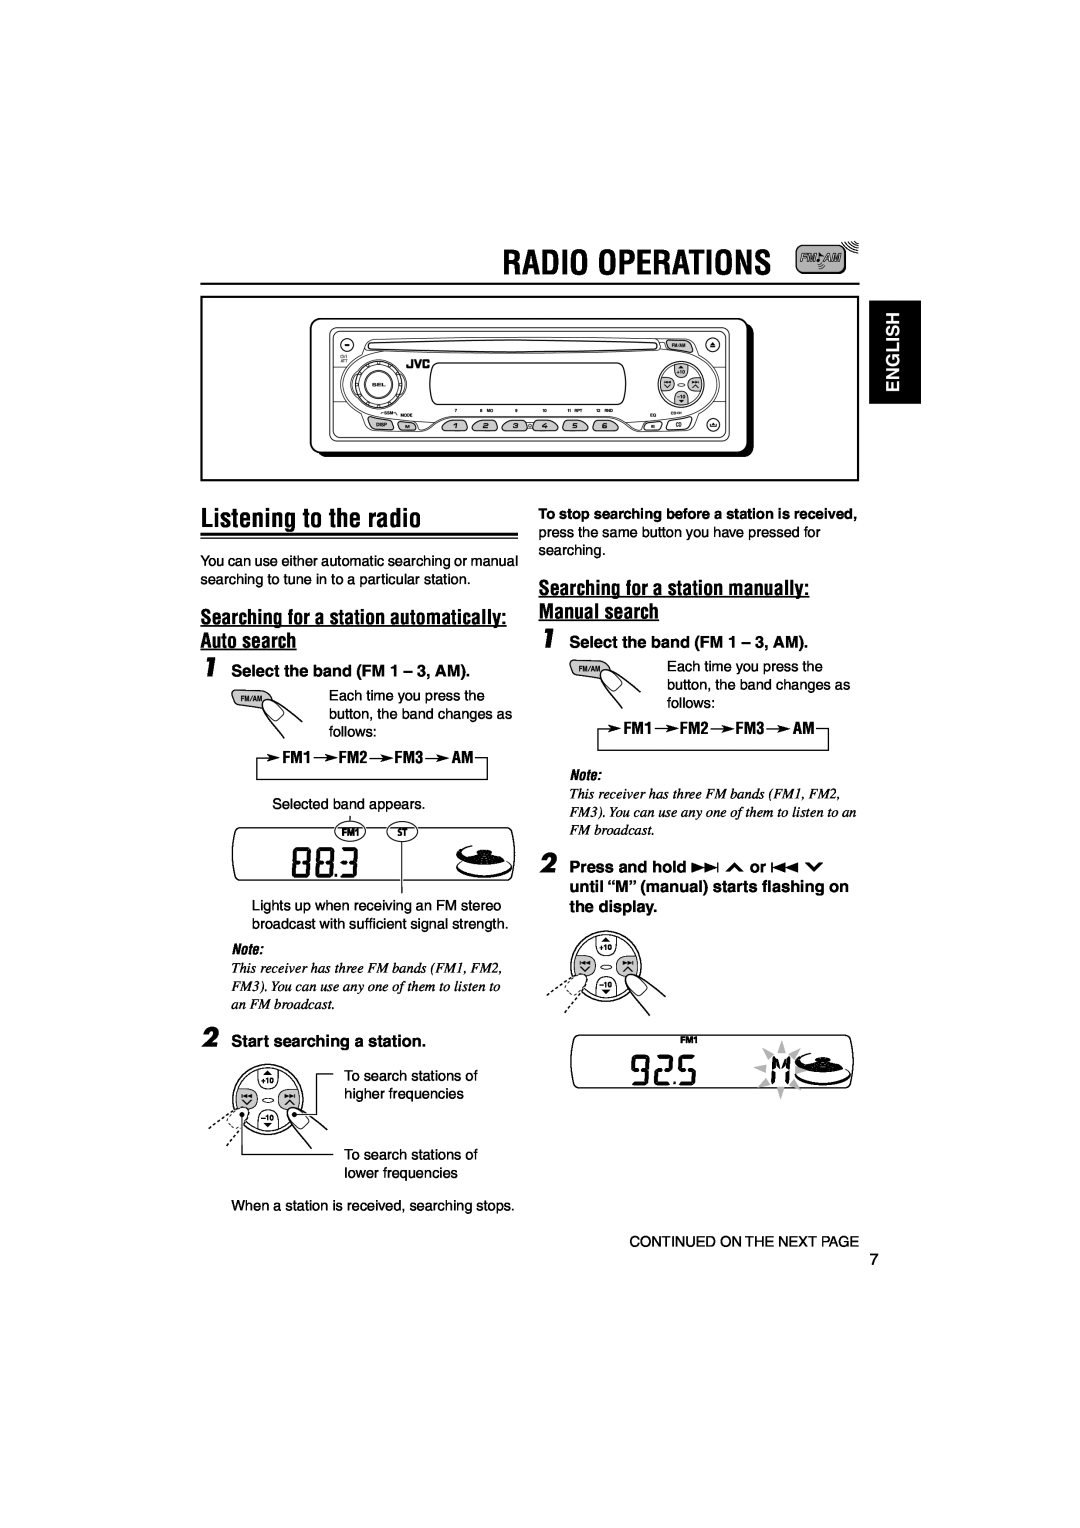 JVC KD-SX50M, KD-SX60WT Radio Operations, Listening to the radio, Searching for a station manually Manual search, English 